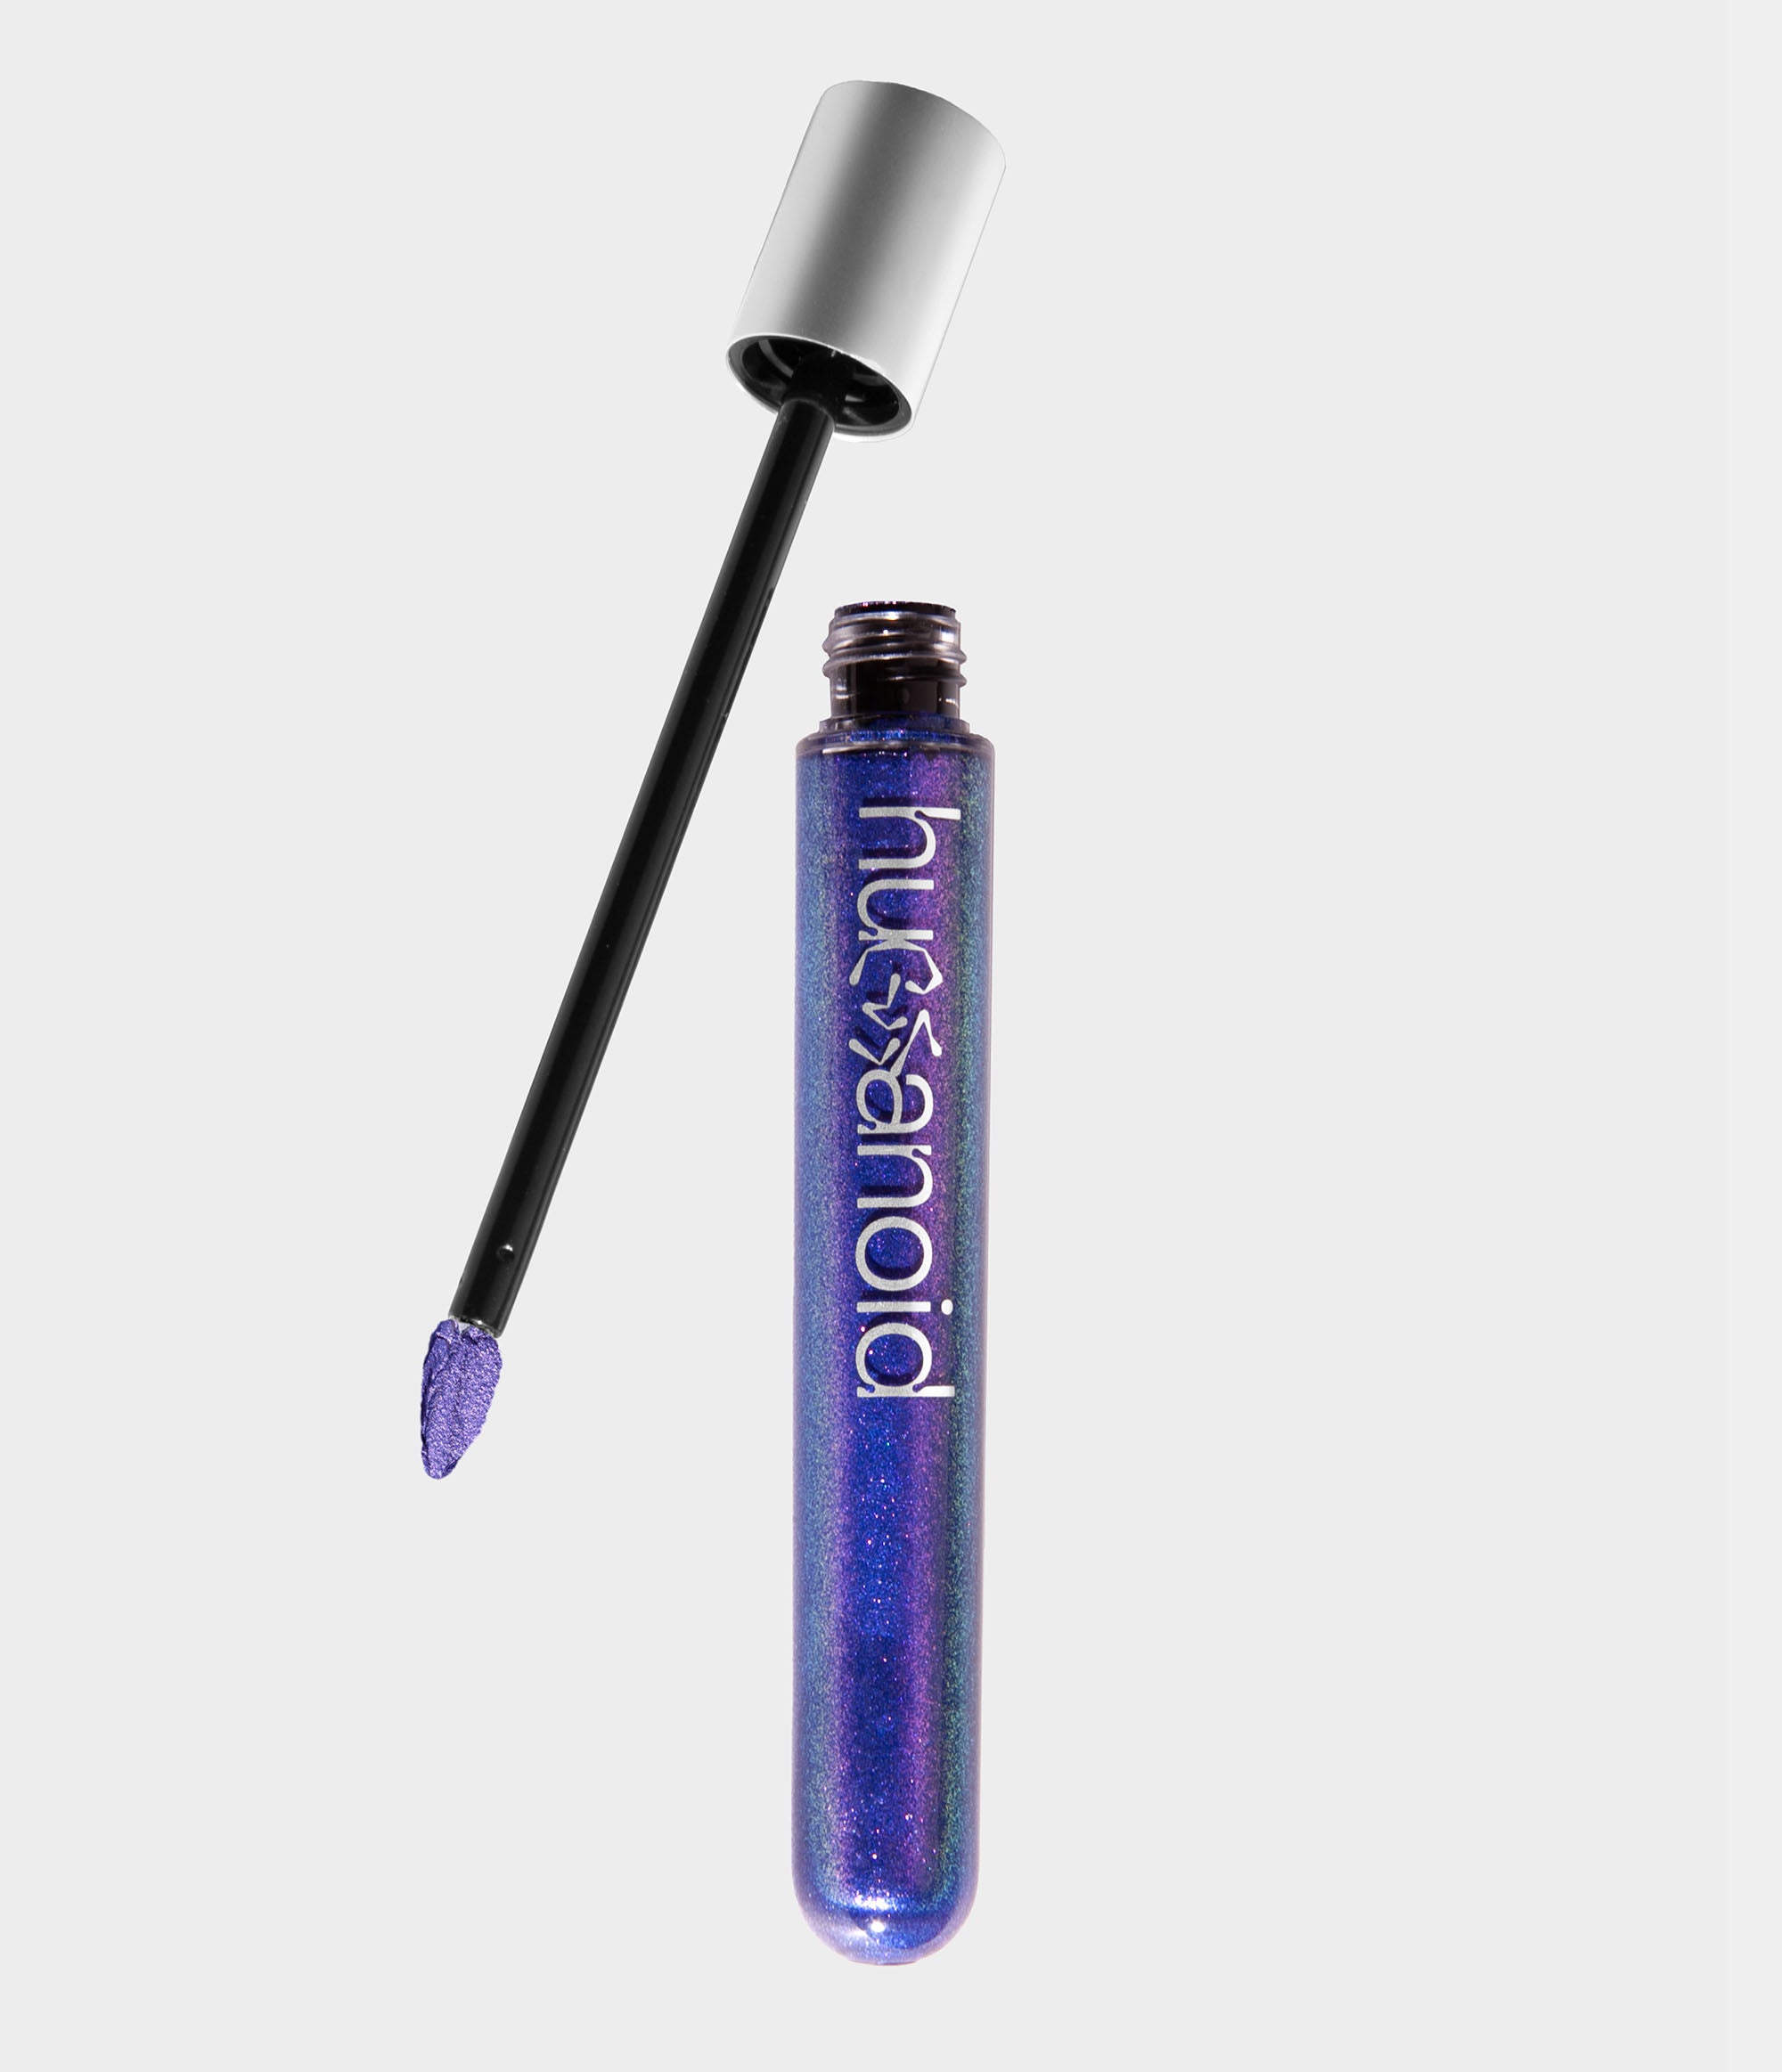 A transparent tube of shimmery vibrant purple liquid makeup with an unscrewed silver cap sitting next to it. A doe foot makeup applicator coated in green makeup extends out of the cap.